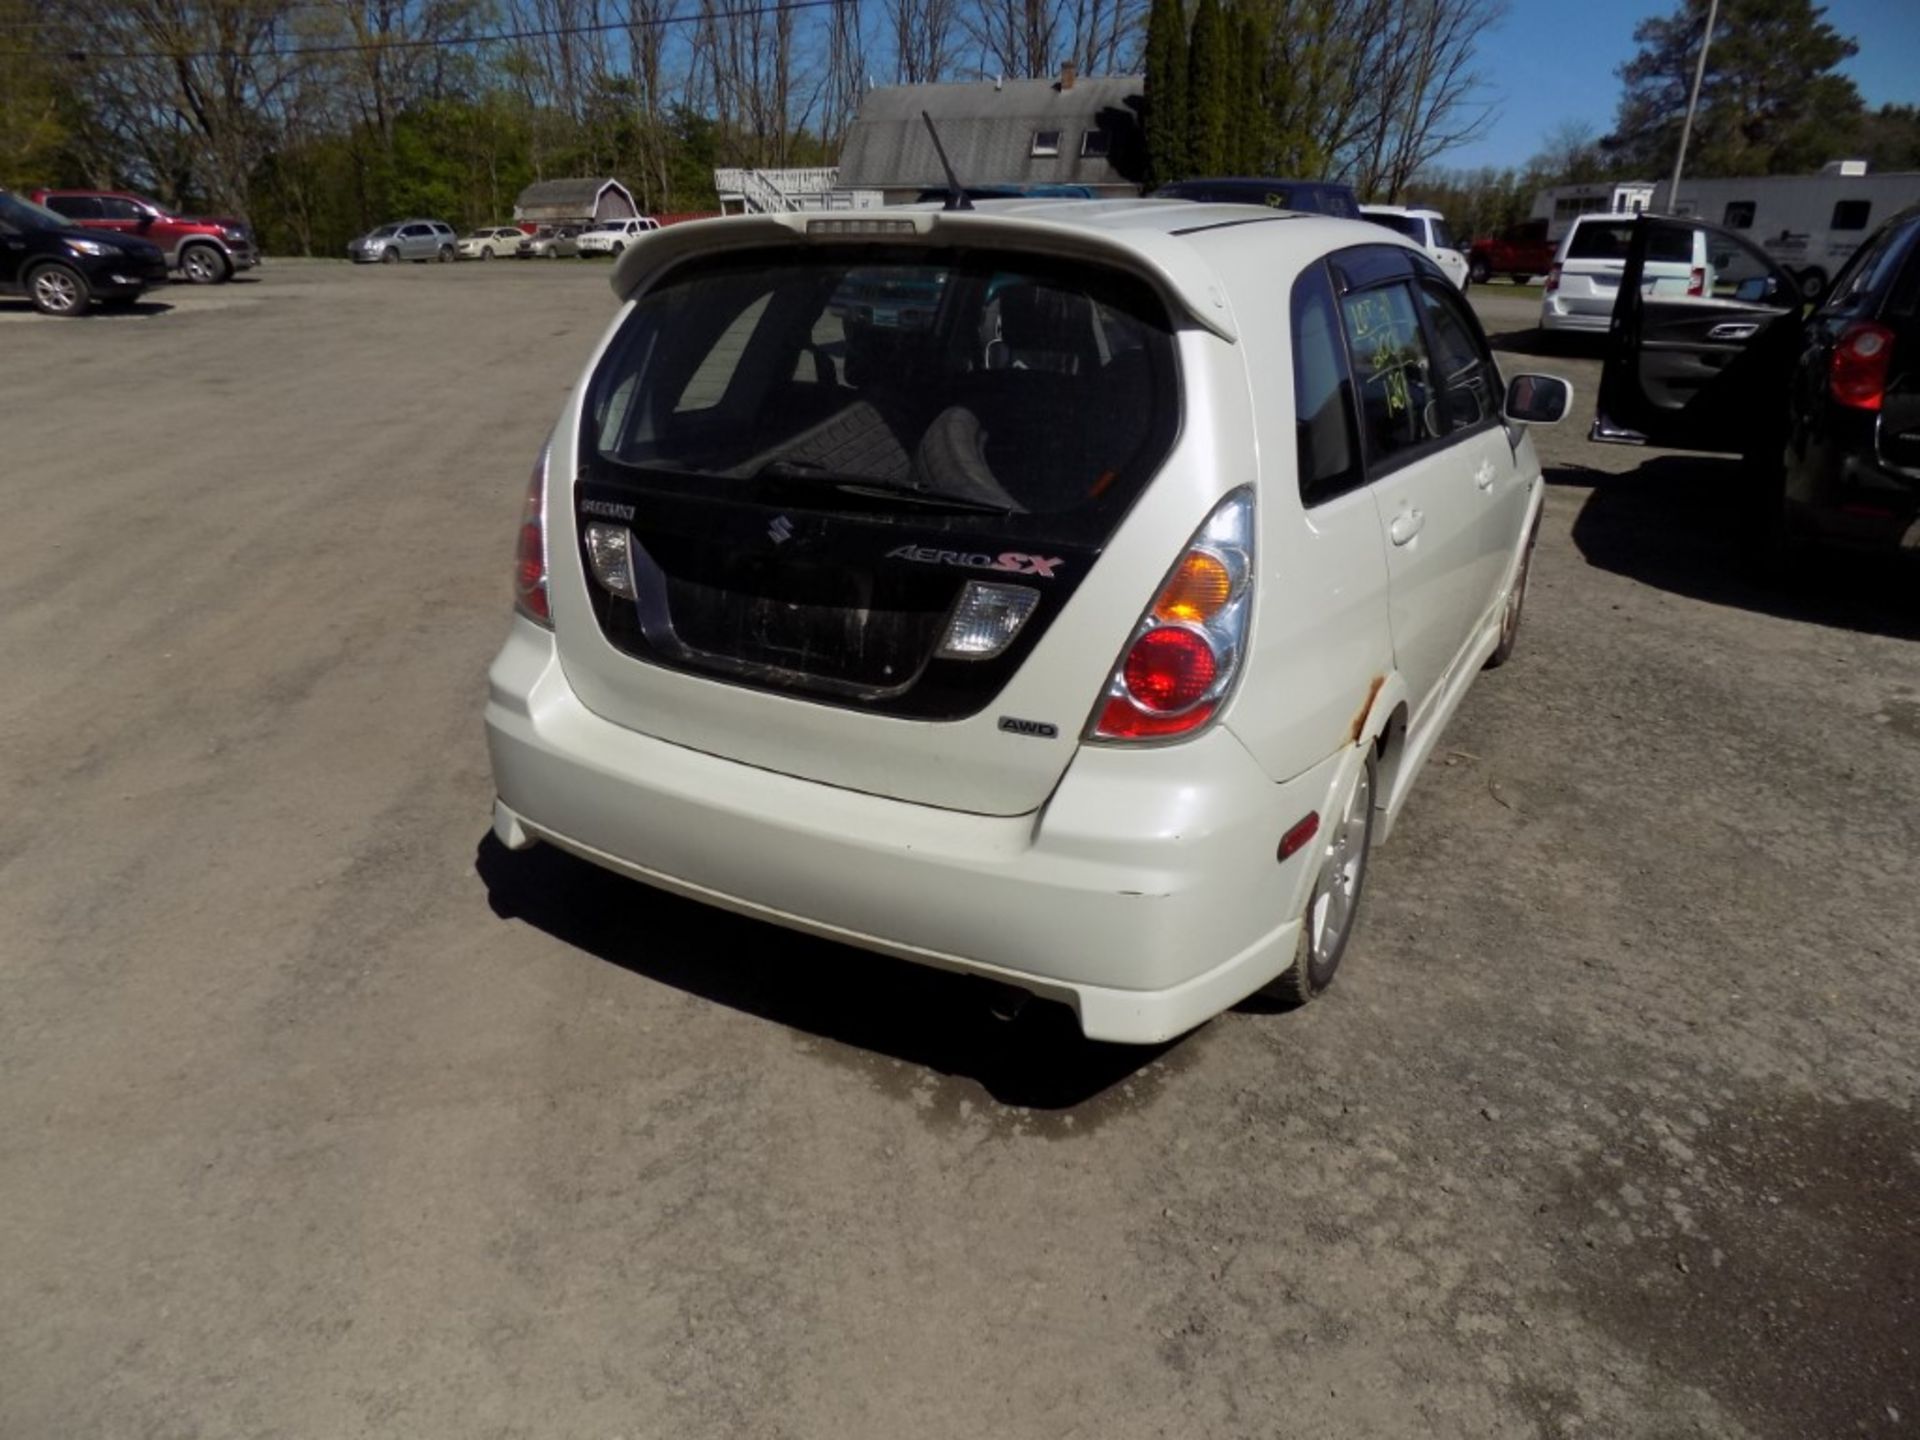 2006 Suzuki Aerio AWD Wagon, 128,701 Miles, Vin # JS2RD61HX65350207 - OPEN TO ALL BUYERS, AIR BAG - Image 3 of 4